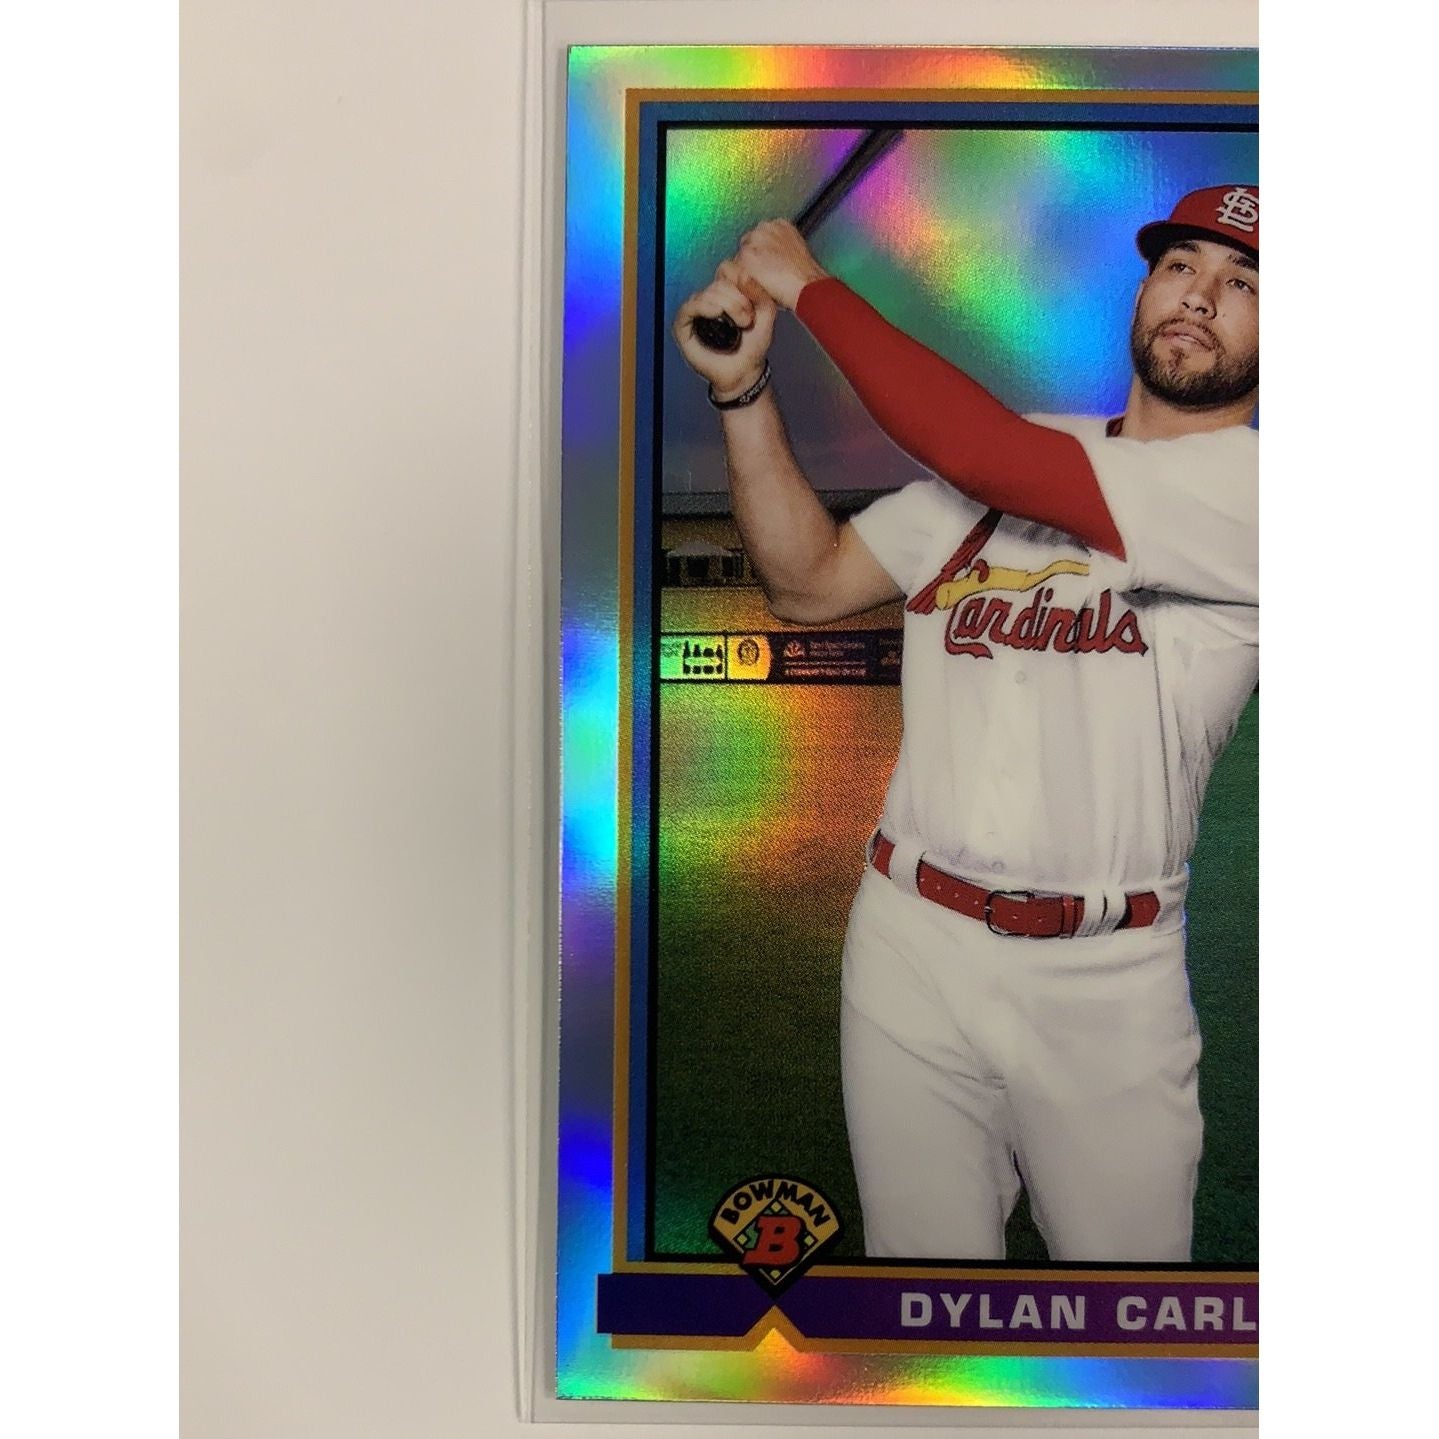  2021 Bowman Chrome Dylan Carlson 91’ RC Refractor  Local Legends Cards & Collectibles